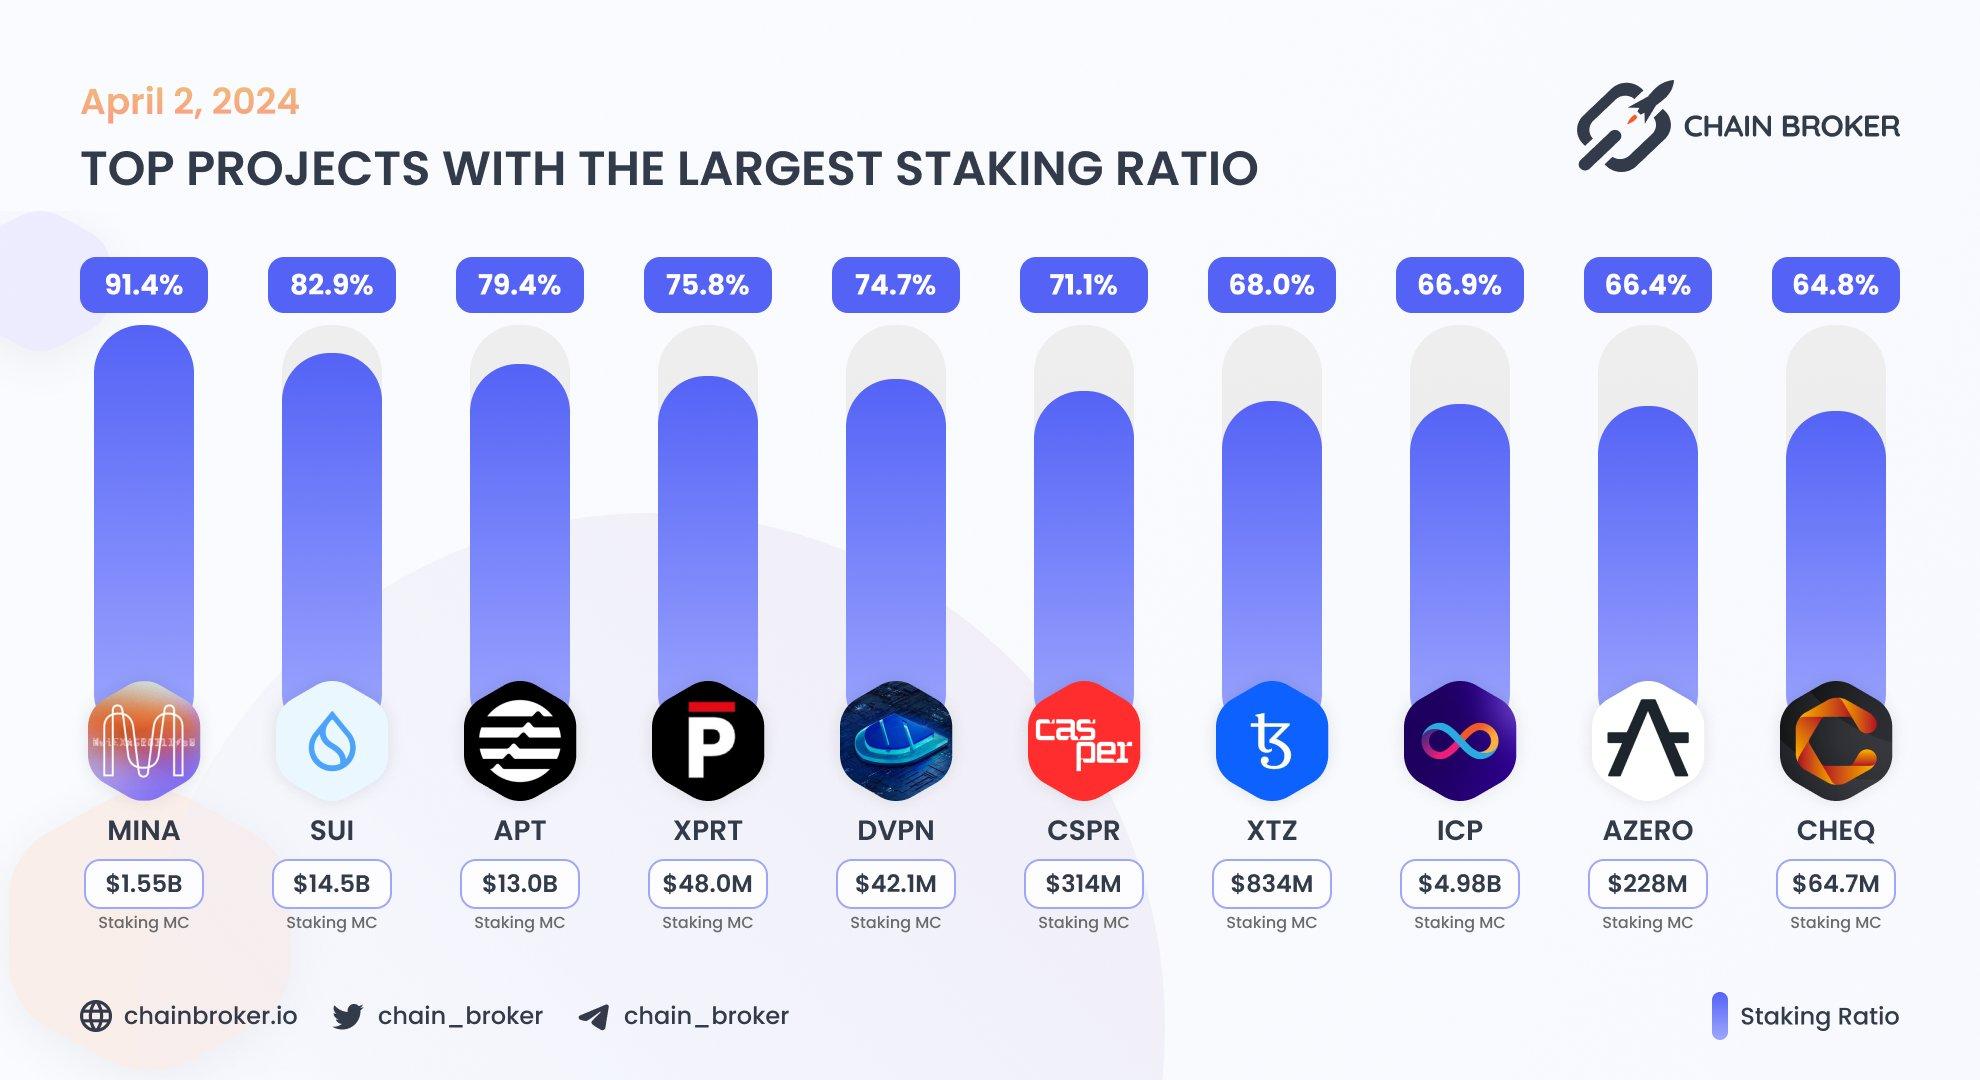 Top projects with the largest staking ratio